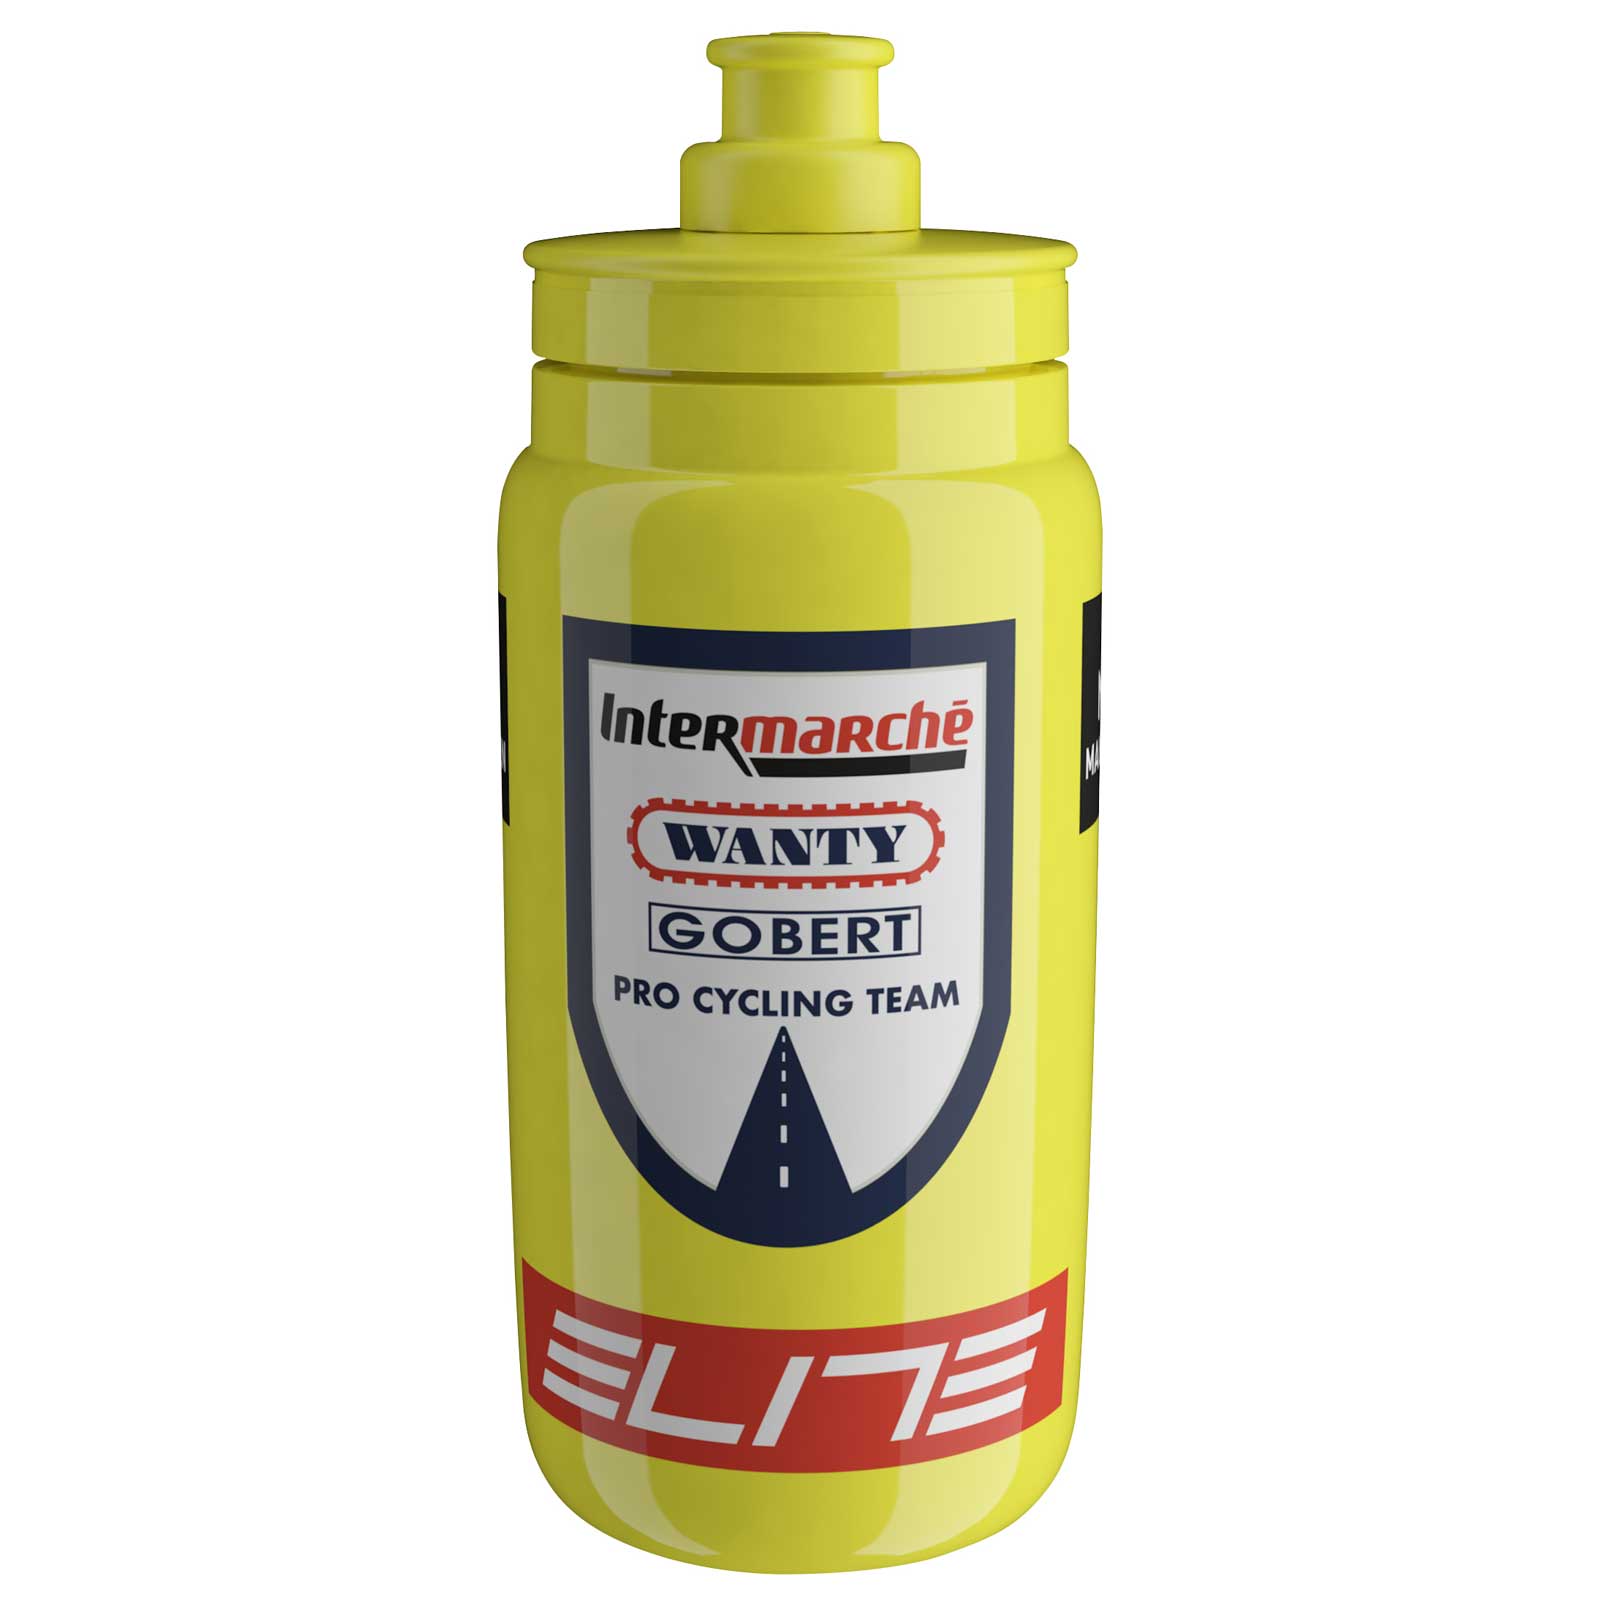 Picture of Elite Fly Team Bottle - 550ml - Intermarché-Wanty-Gobert